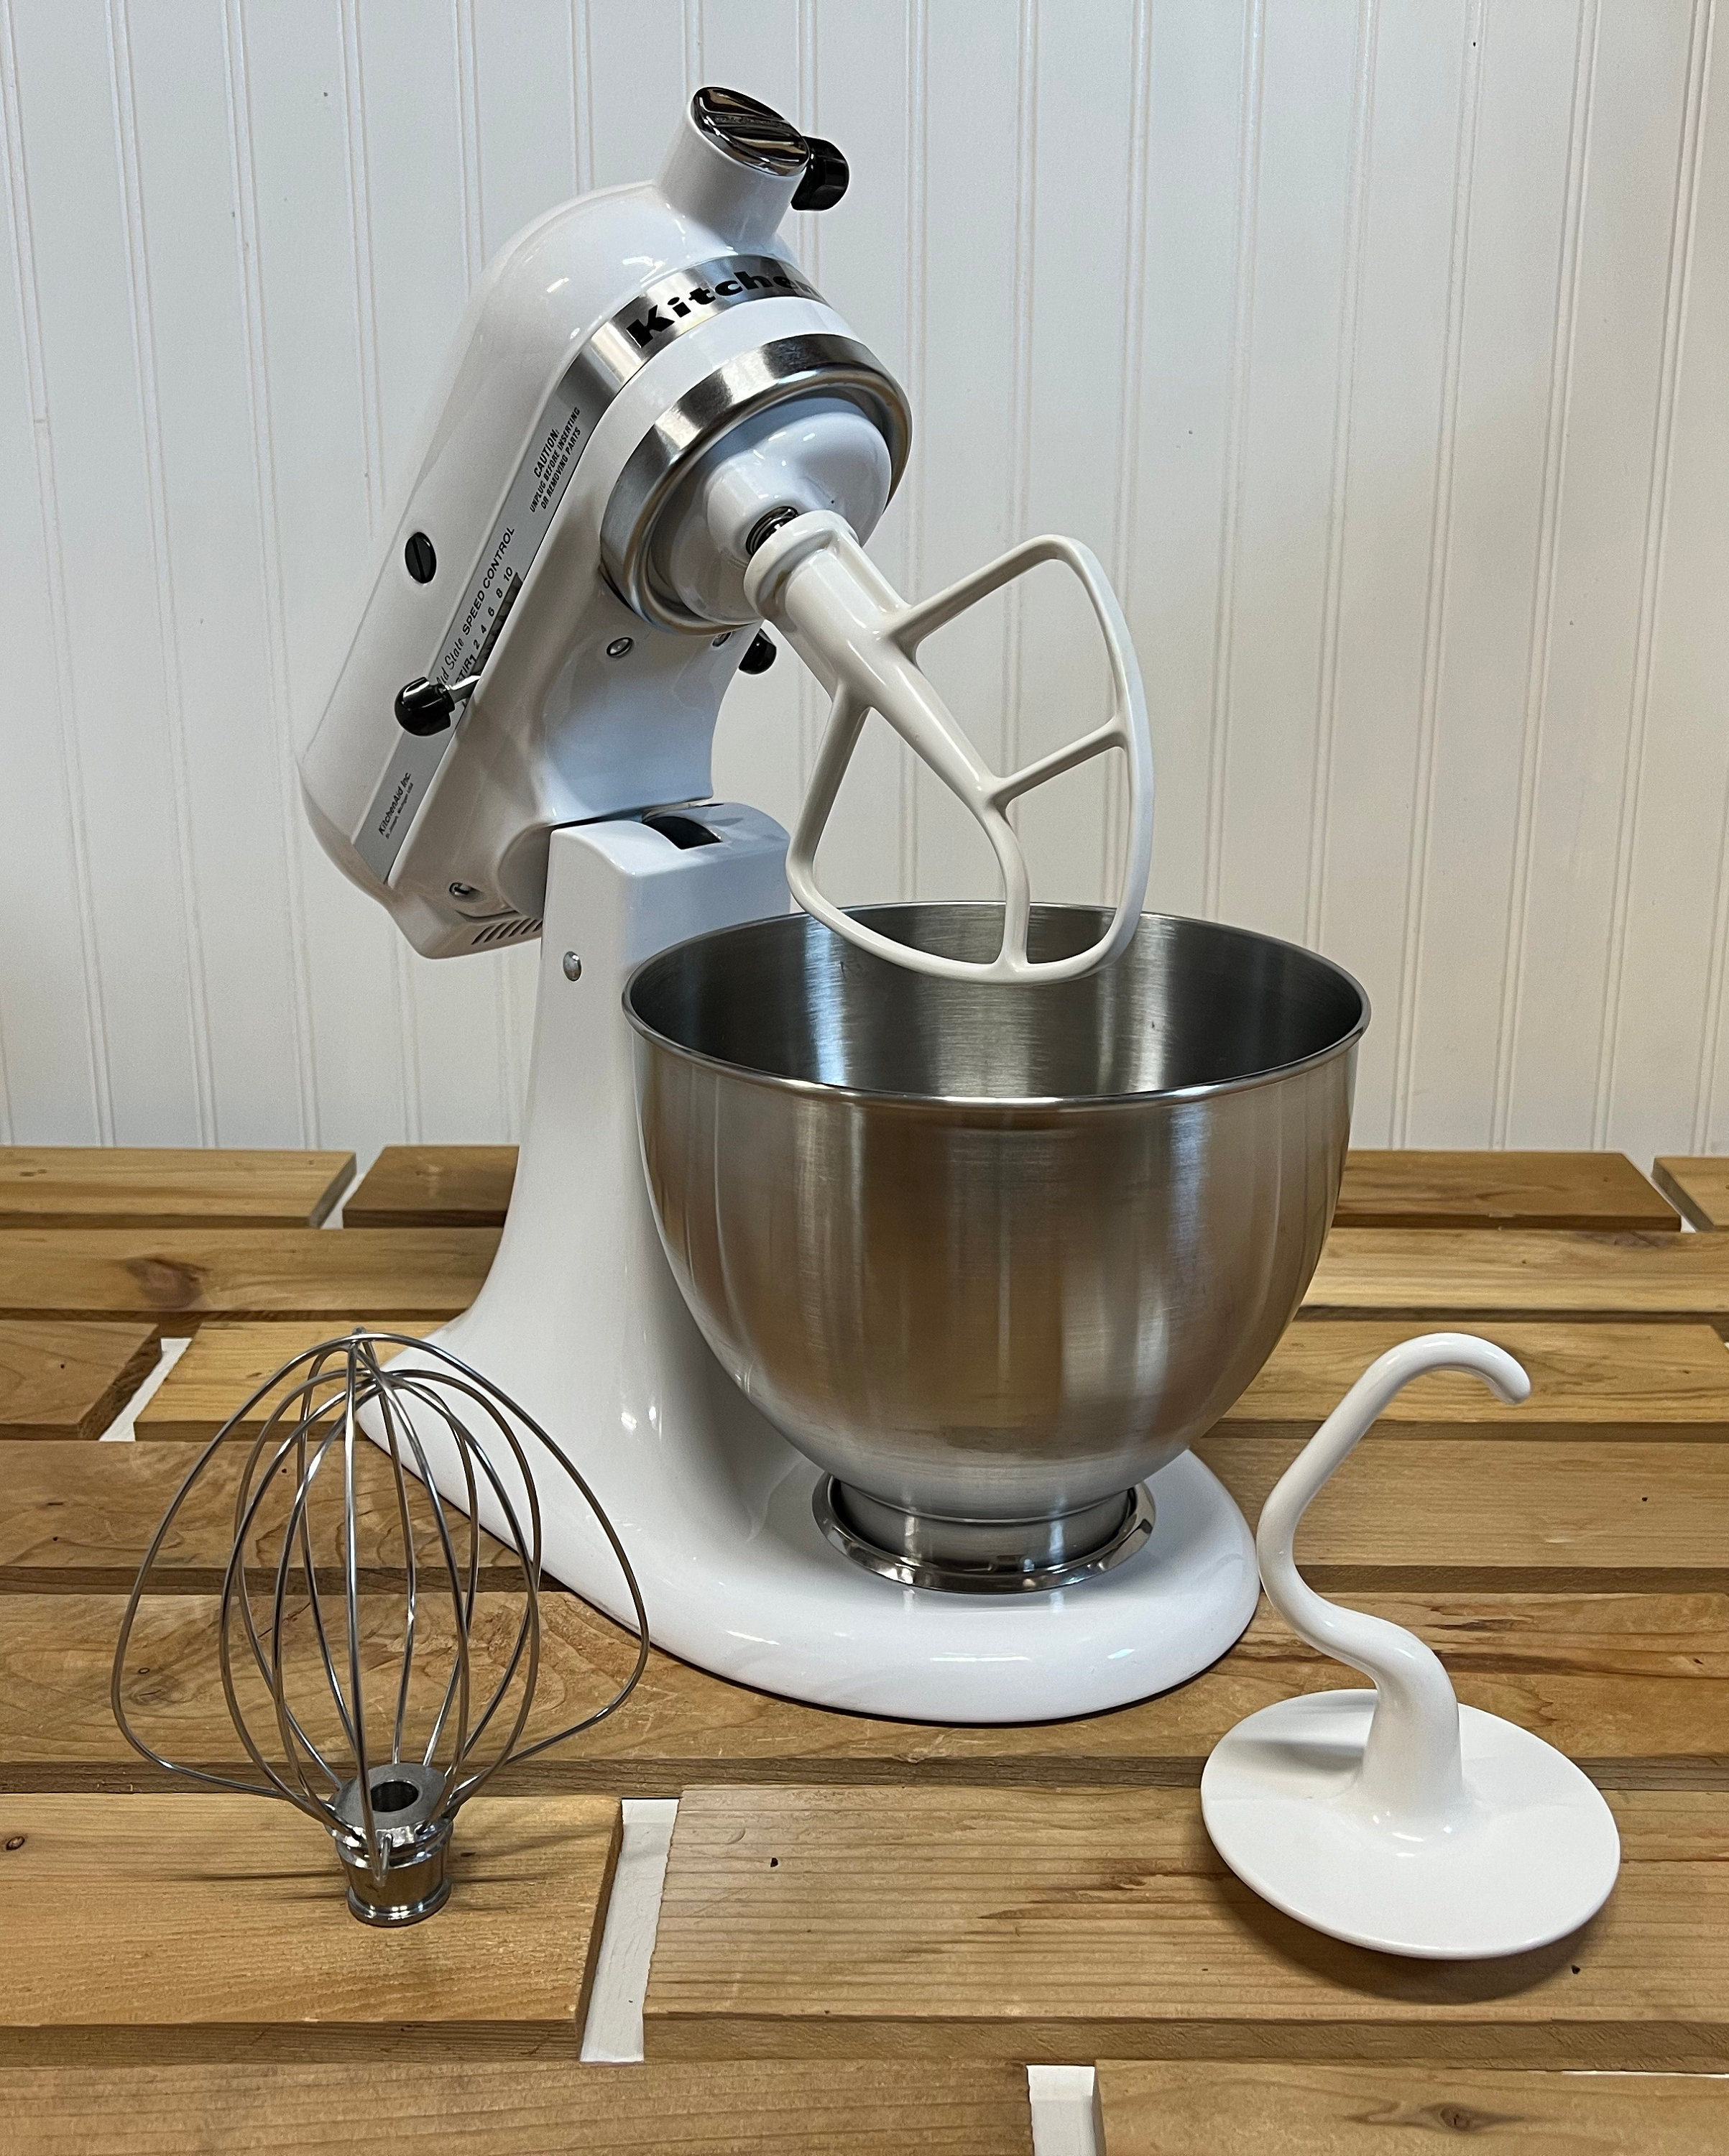 Upgrade Your KitchenAid Mixer! Protect it with the Everdime! 